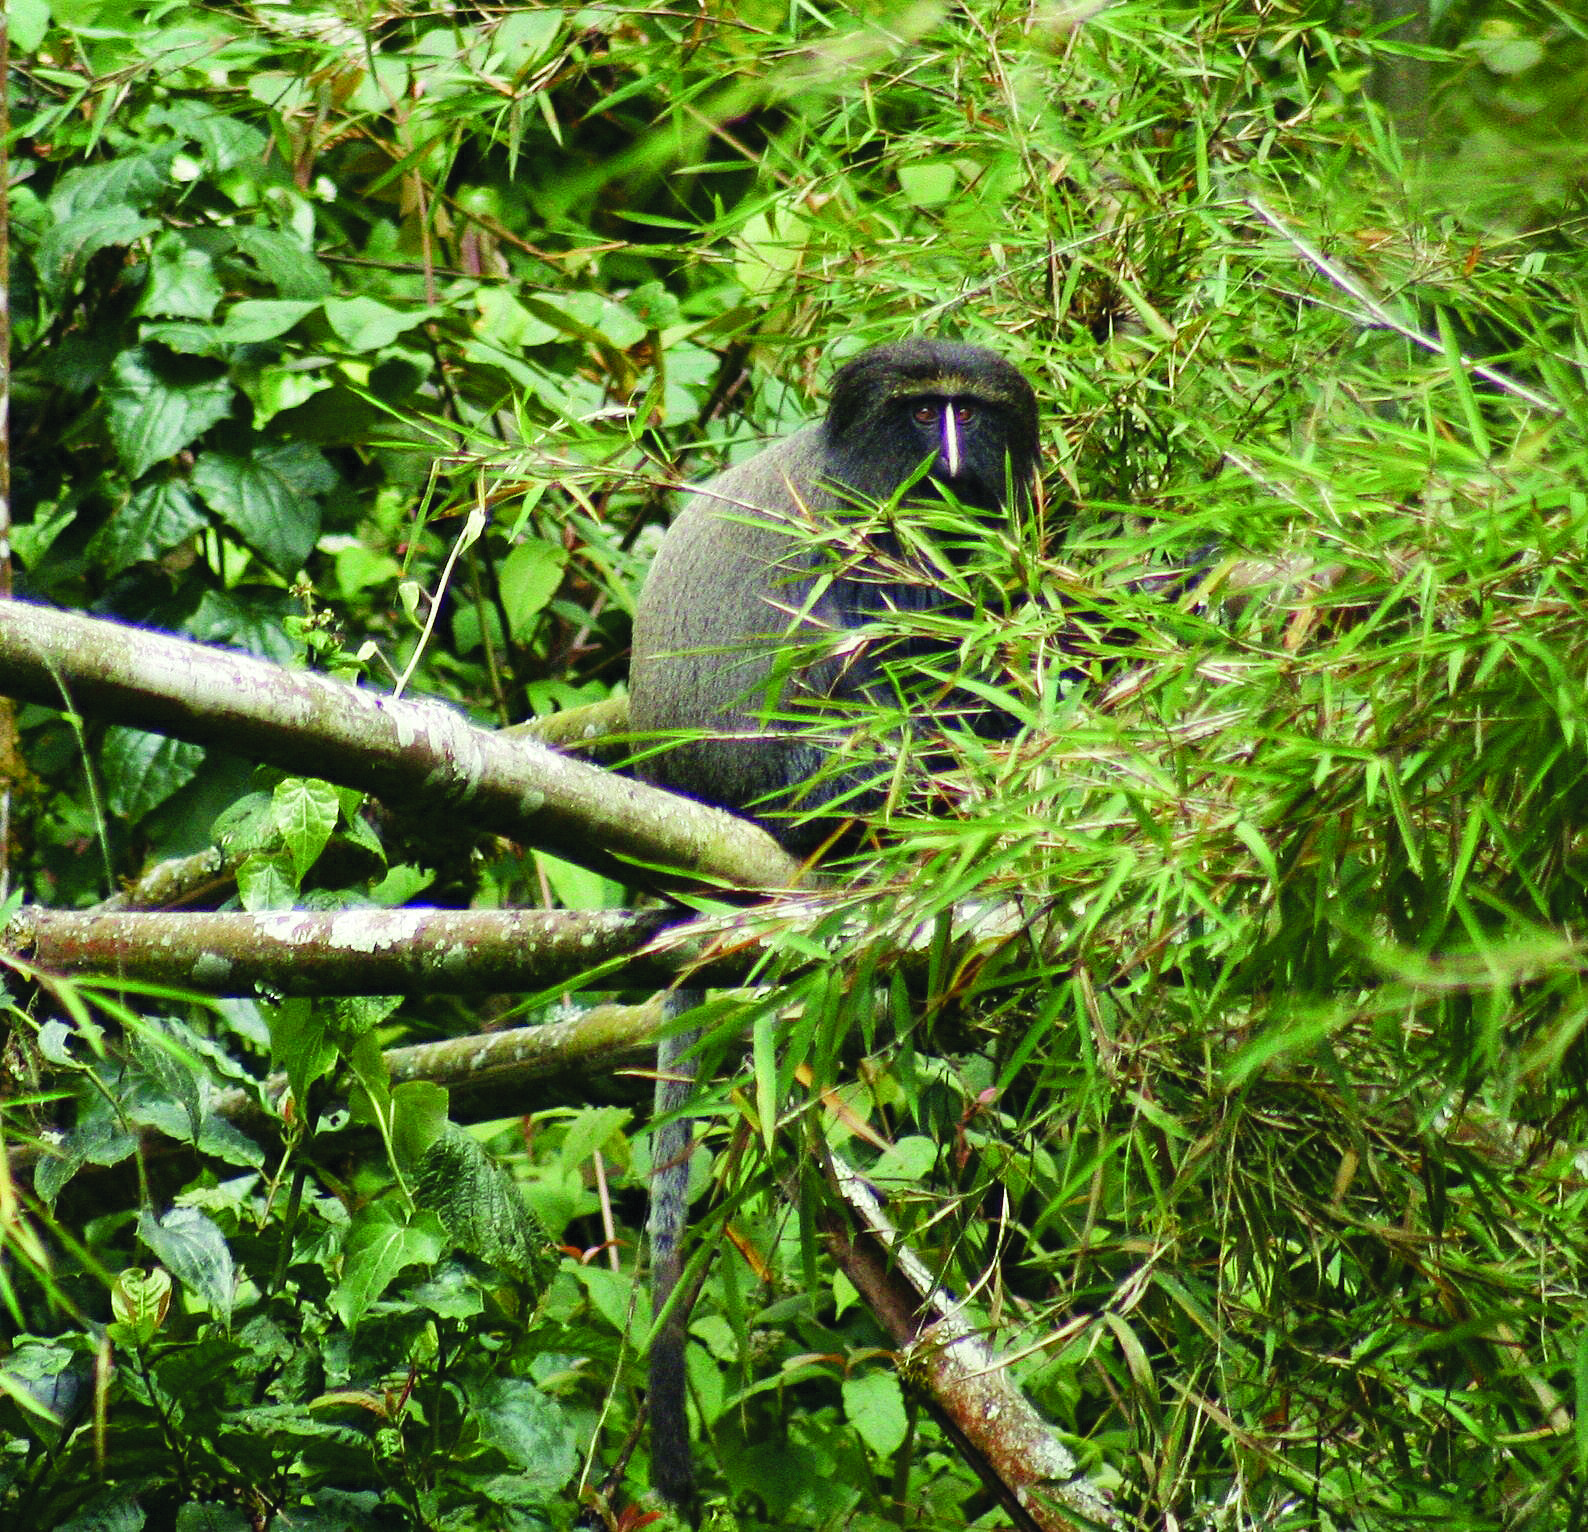 Owl-Faced Monkey In Nyungwe Forest National Park